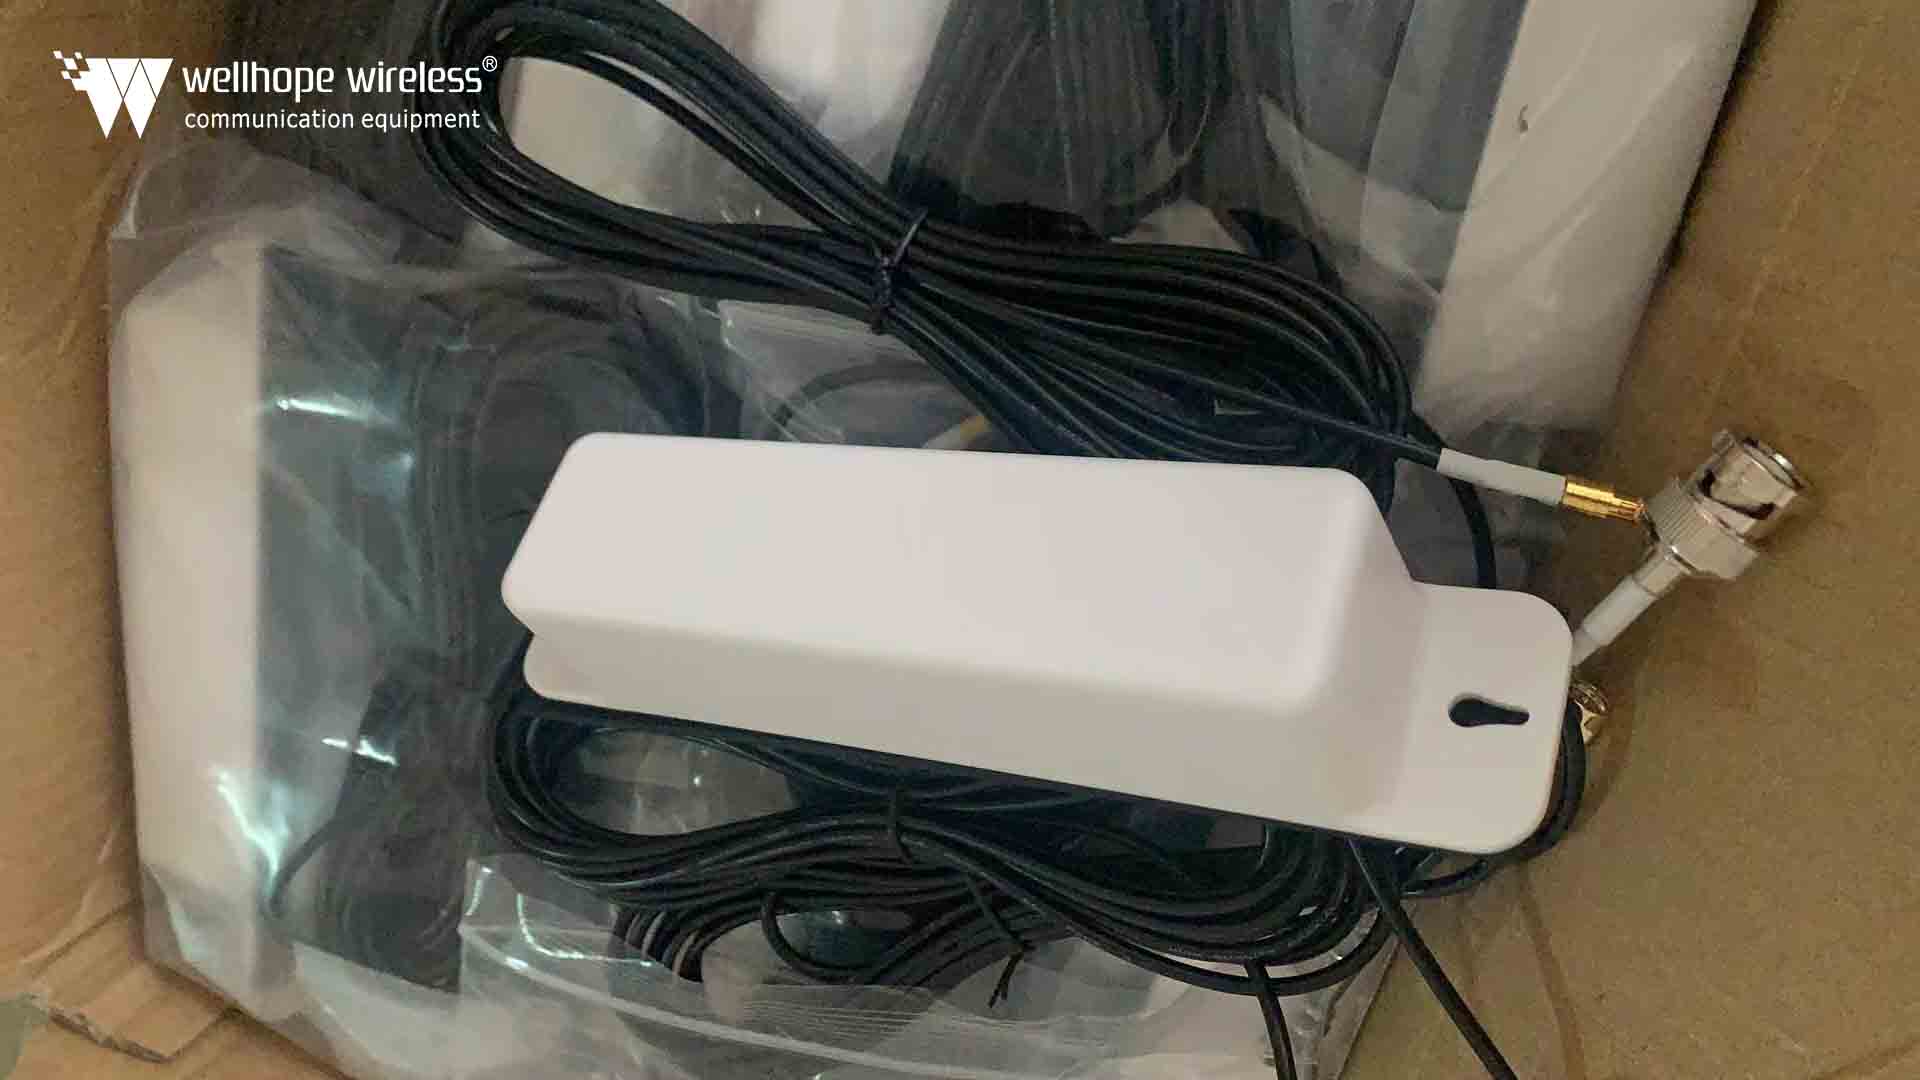 2023-3-8 400pcs WH-DB-KH 4G GNSS 440MHz combine antenna ready 